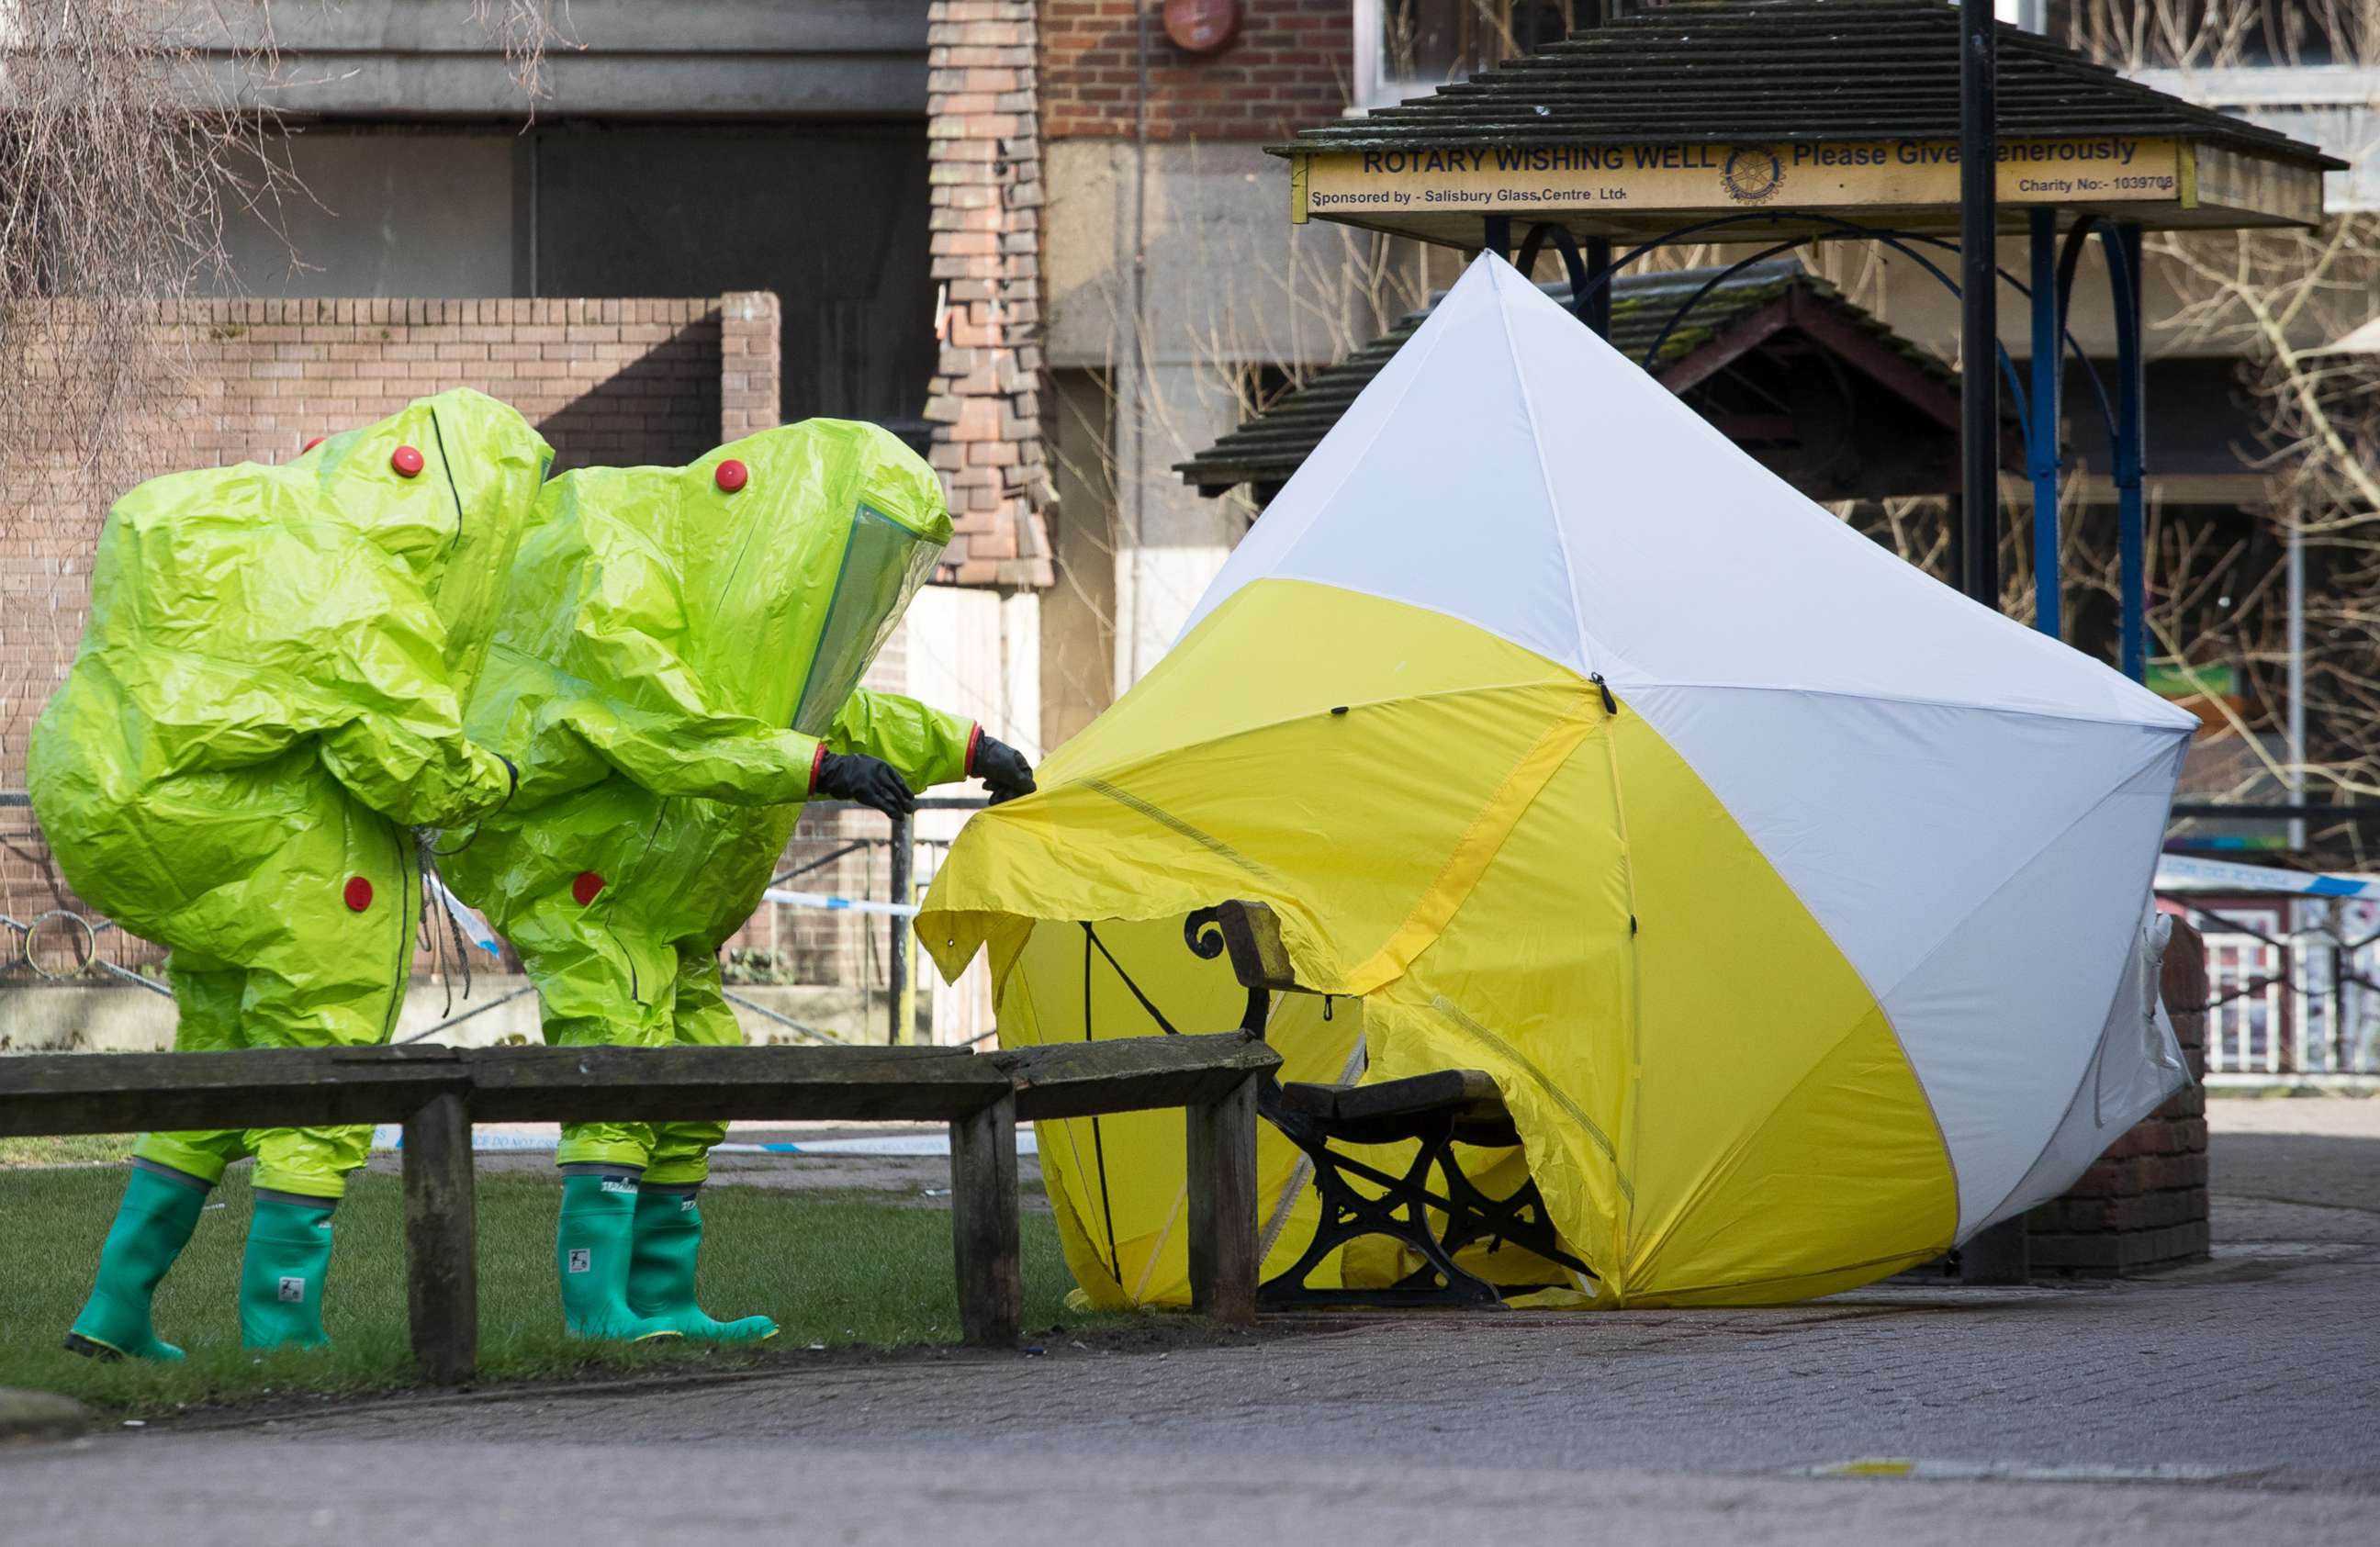 PHOTO: Specialists in protective suits secure the forensic tent on March 8, 2018, that had been blown over by the wind and is covering the bench where Sergei Skripal was found with his daughter after an apparent nerve agent attack, in Salisbury, England.